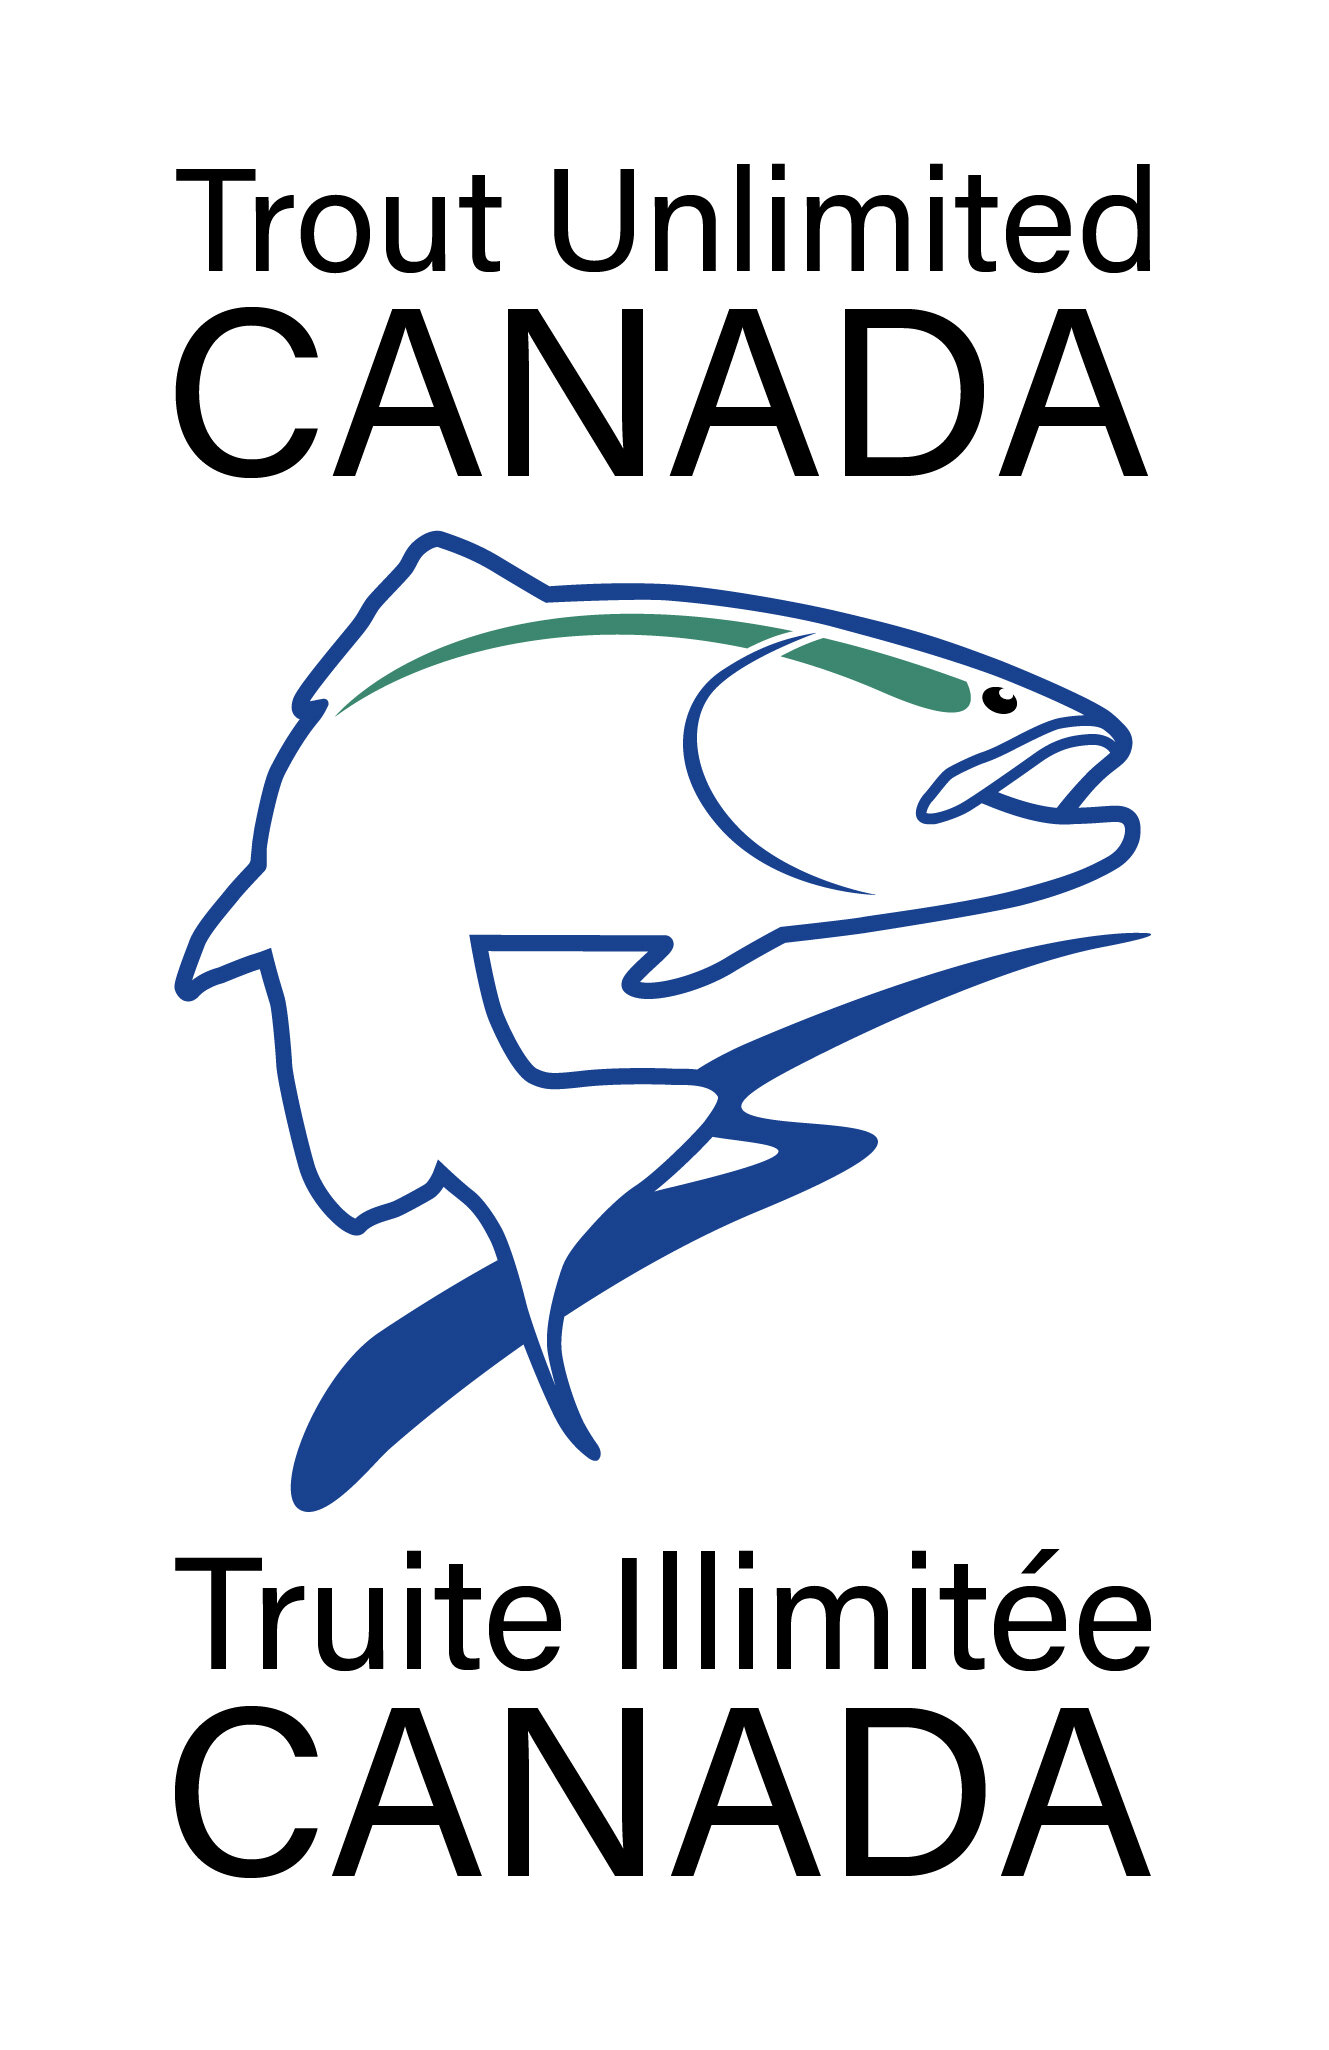 Trout-Unlimited-Canada-LogoVertical.jpg